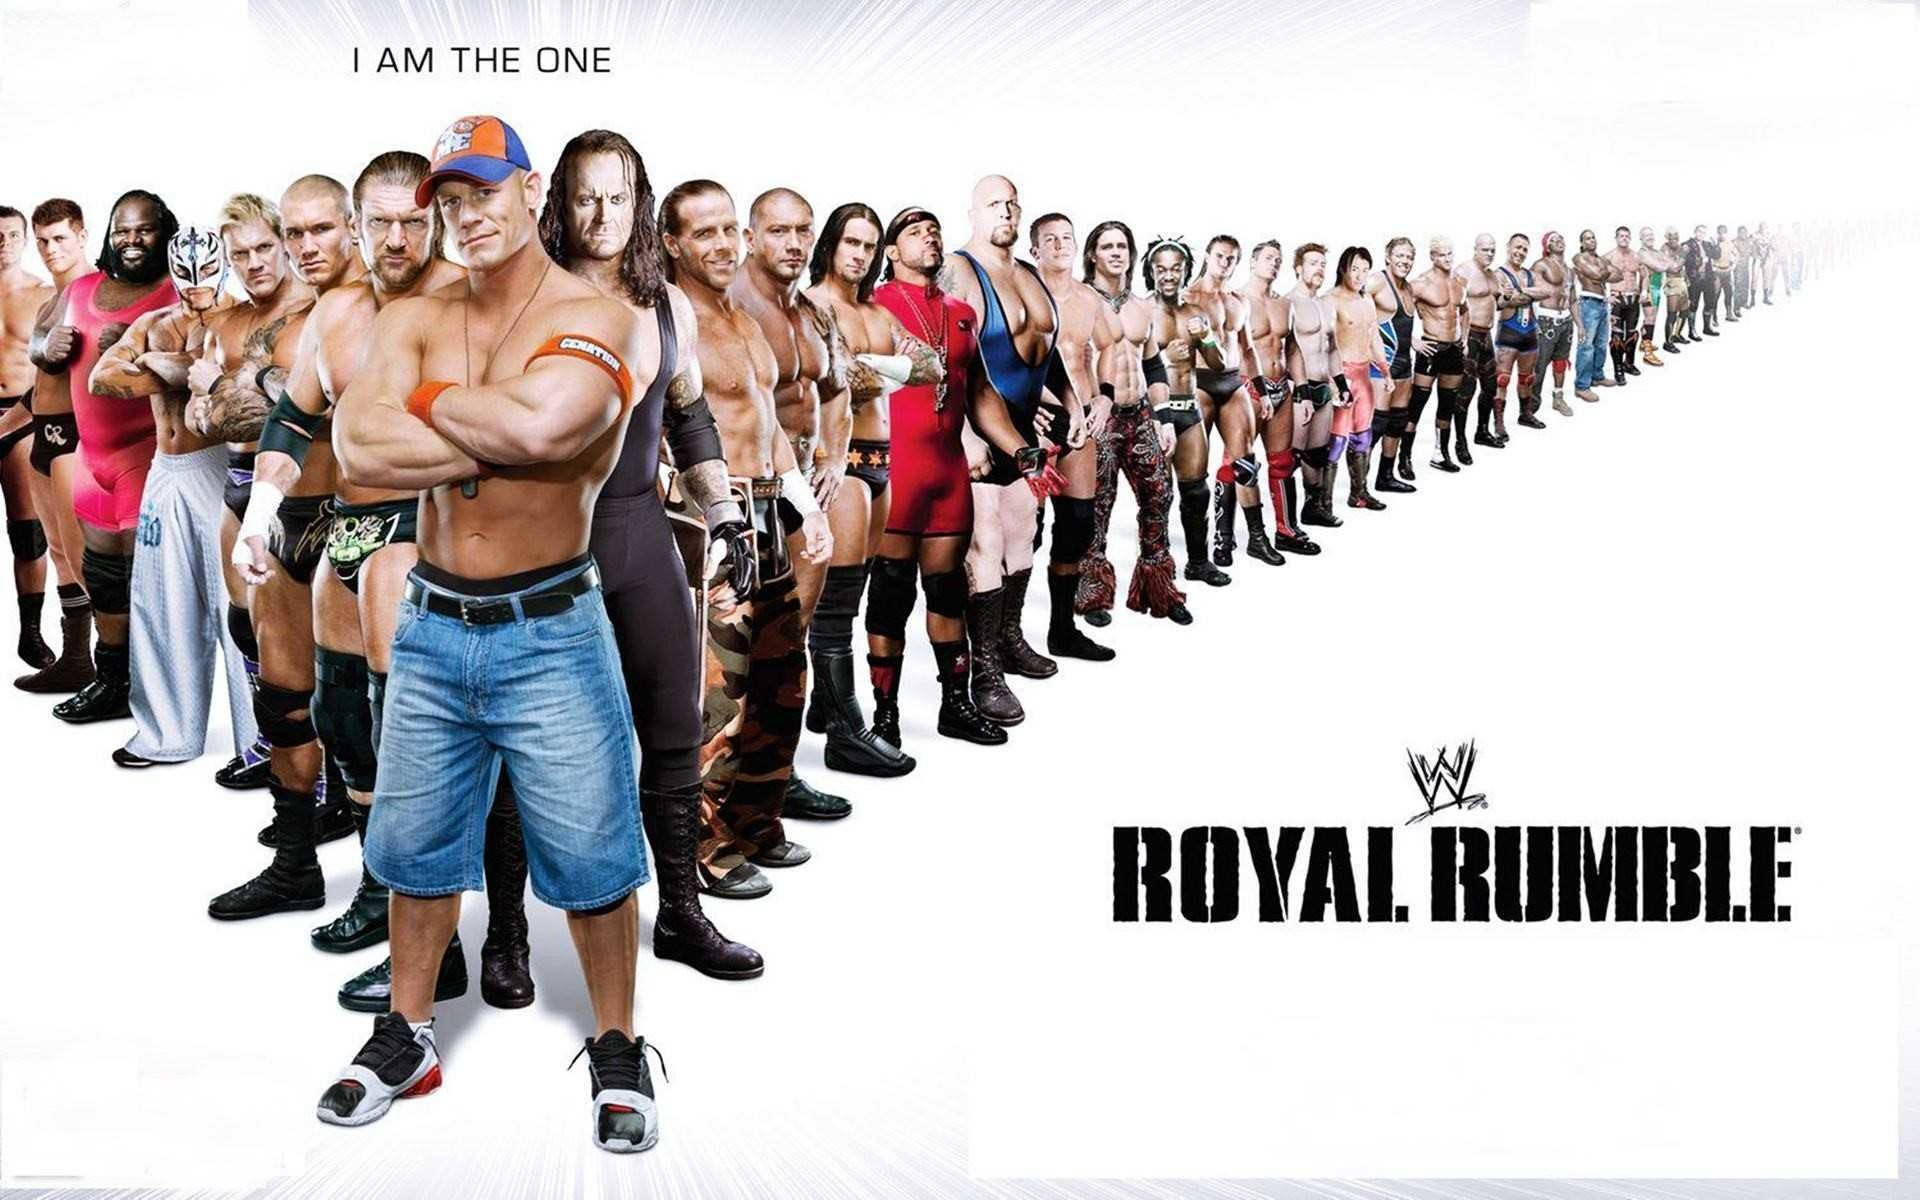 Get Ready For Action! Experience An Epic Royal Rumble Background